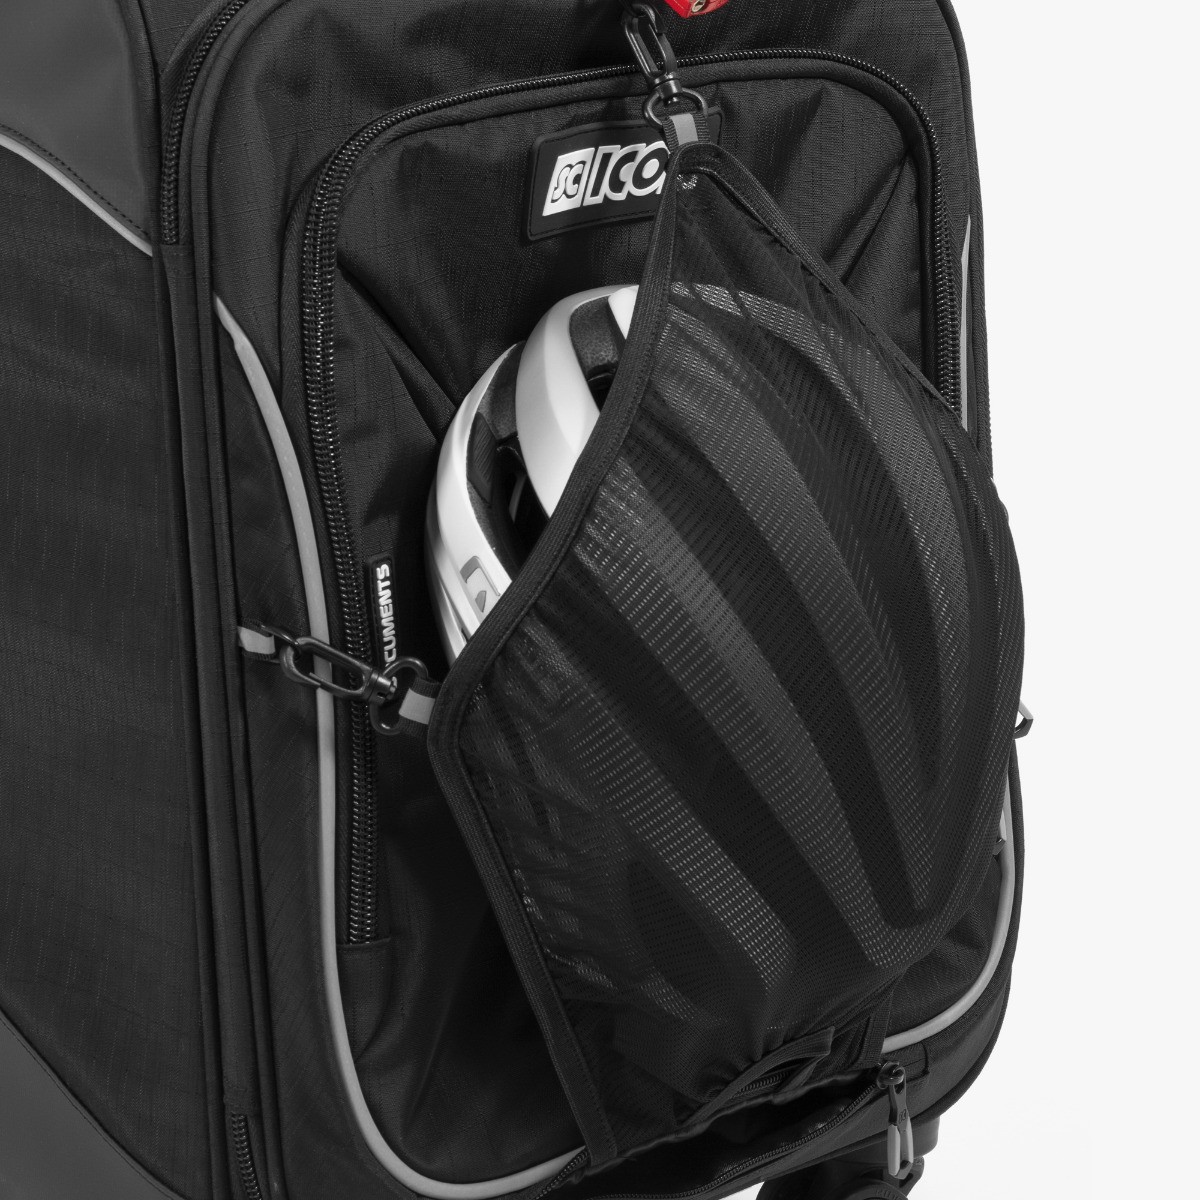 CARRY-ON HAND LUGGAGE 35L - 4WD